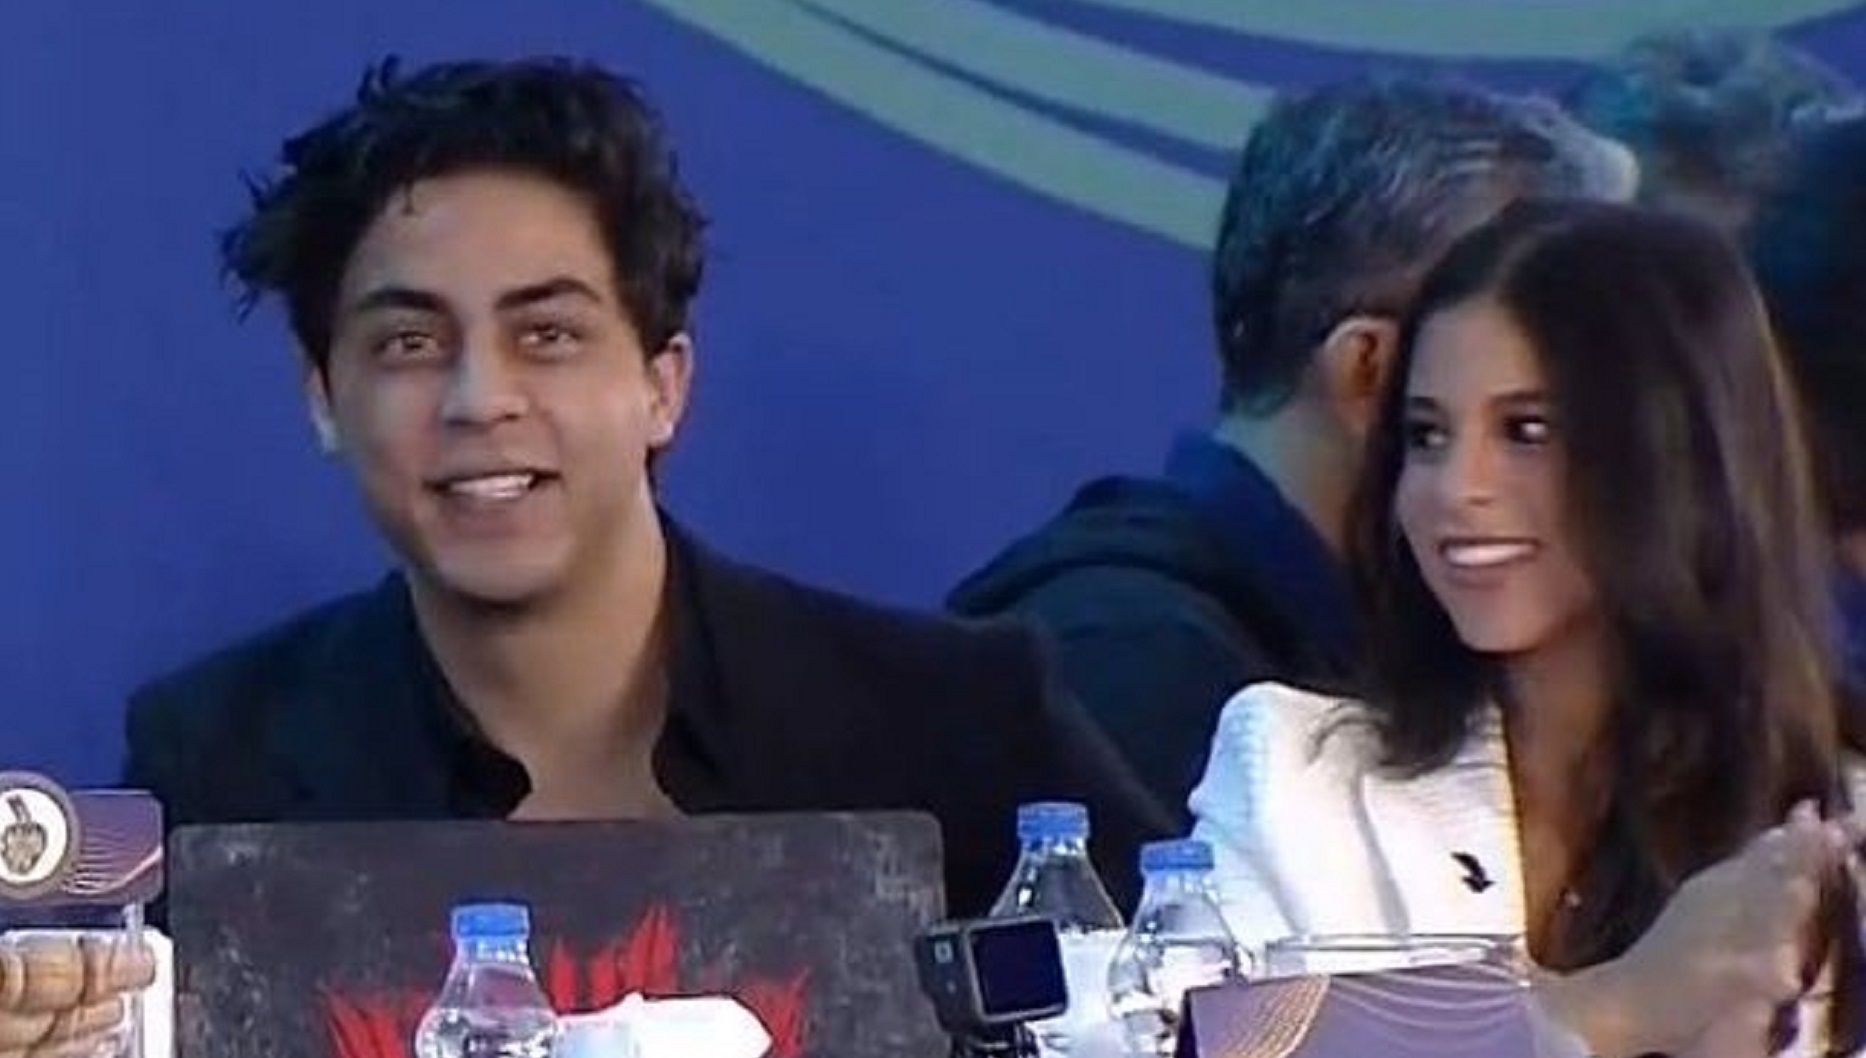 Aryan Khan And Suhana Khan Show Up At IPL Auction, In Place Of Shah Rukh Khan